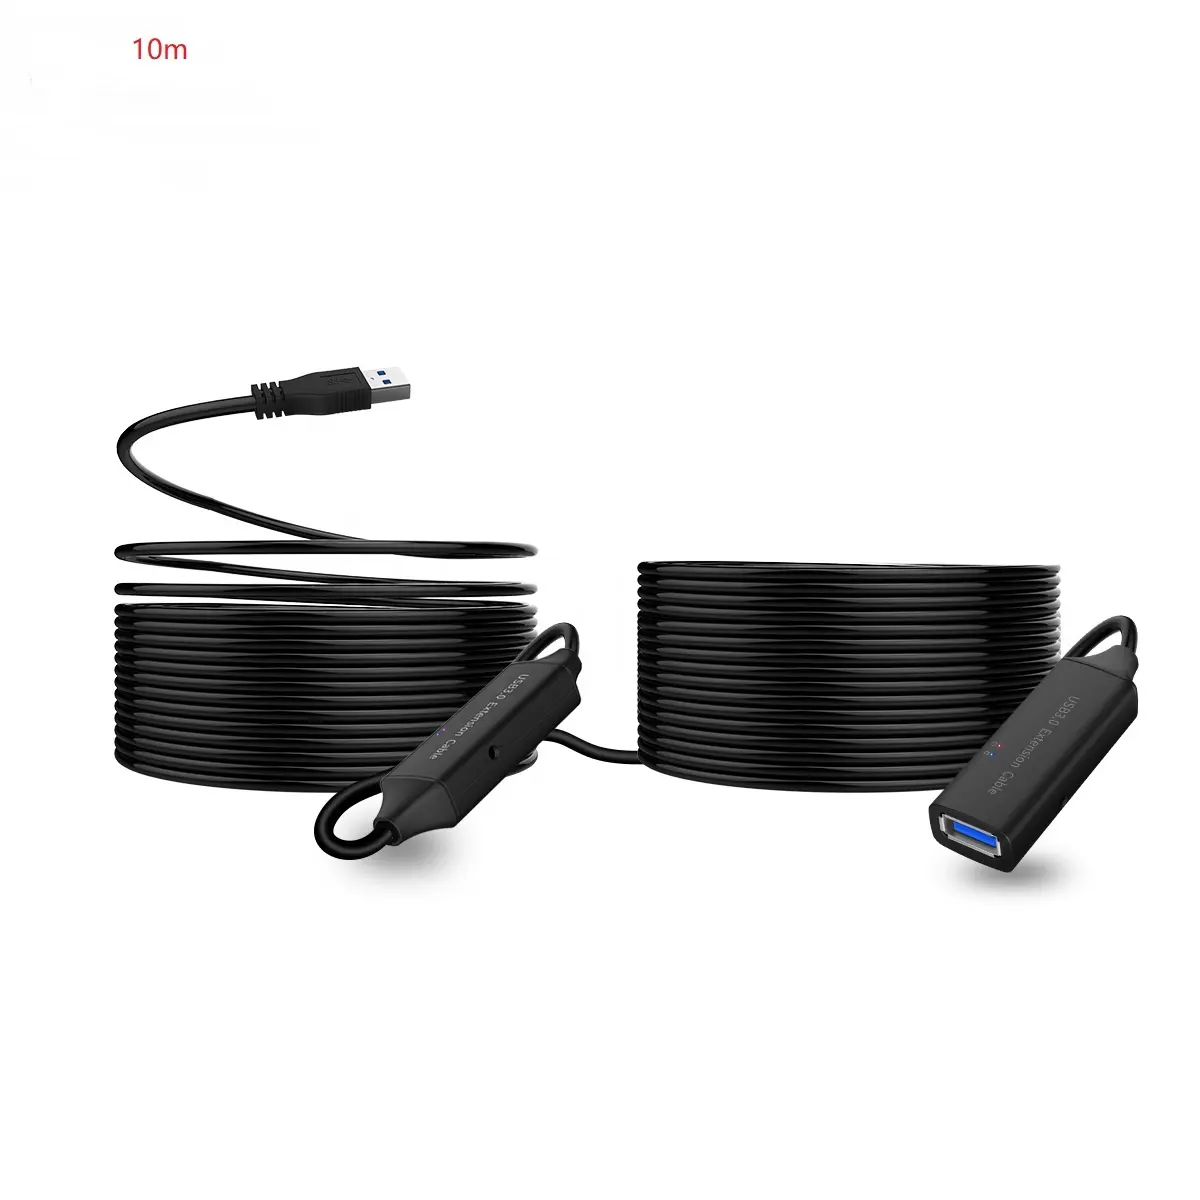 10m black usb 3.0 active extension cable with IC RTS5411